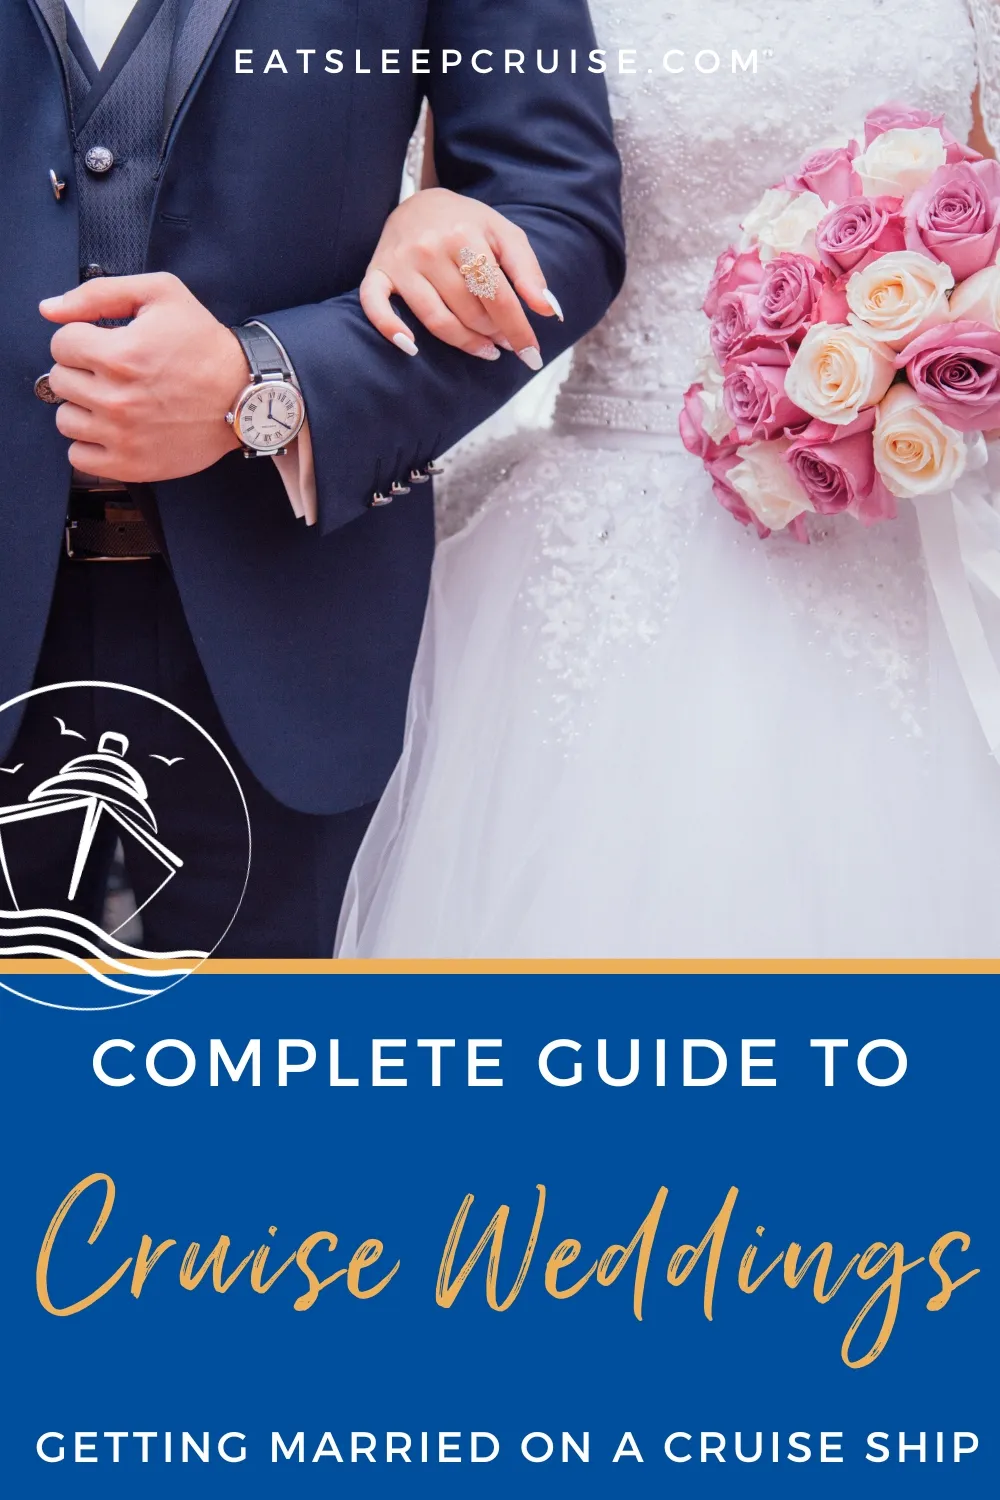 Cruise Weddings Complete Guide to Getting Married on a Cruise Ship